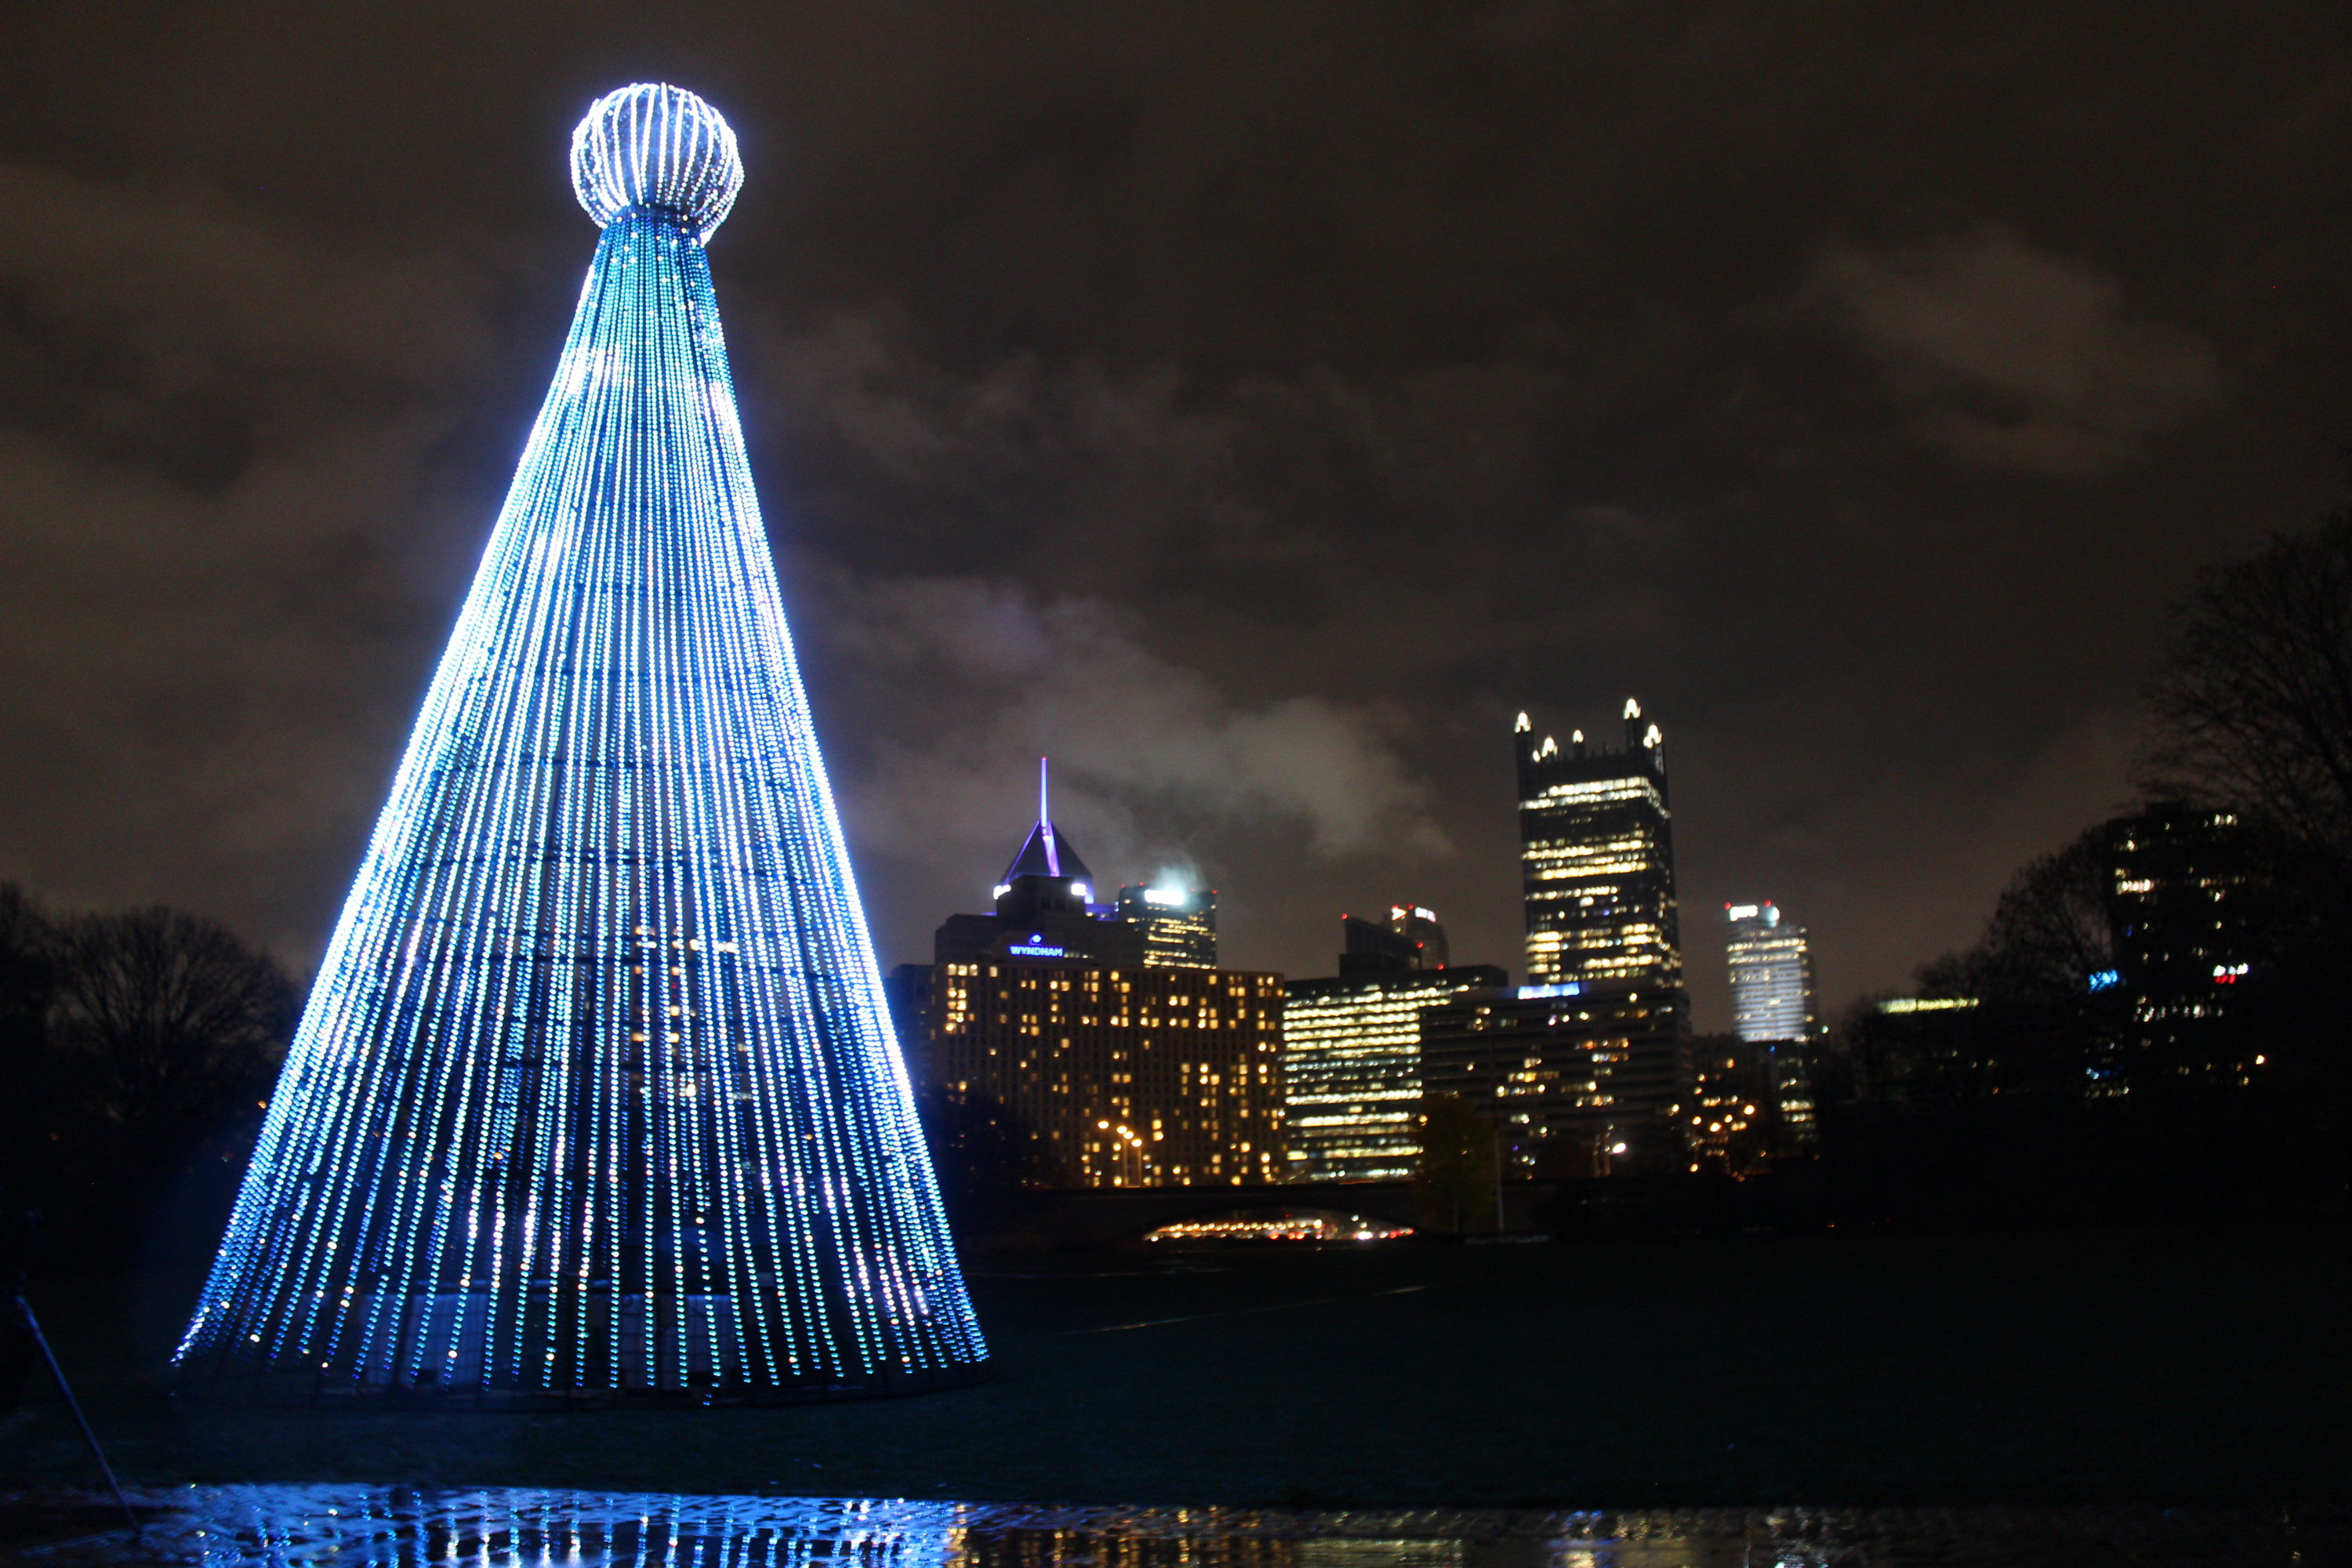 Duquesne Light Company Lights Up a New Holiday Tradition in Pittsburgh